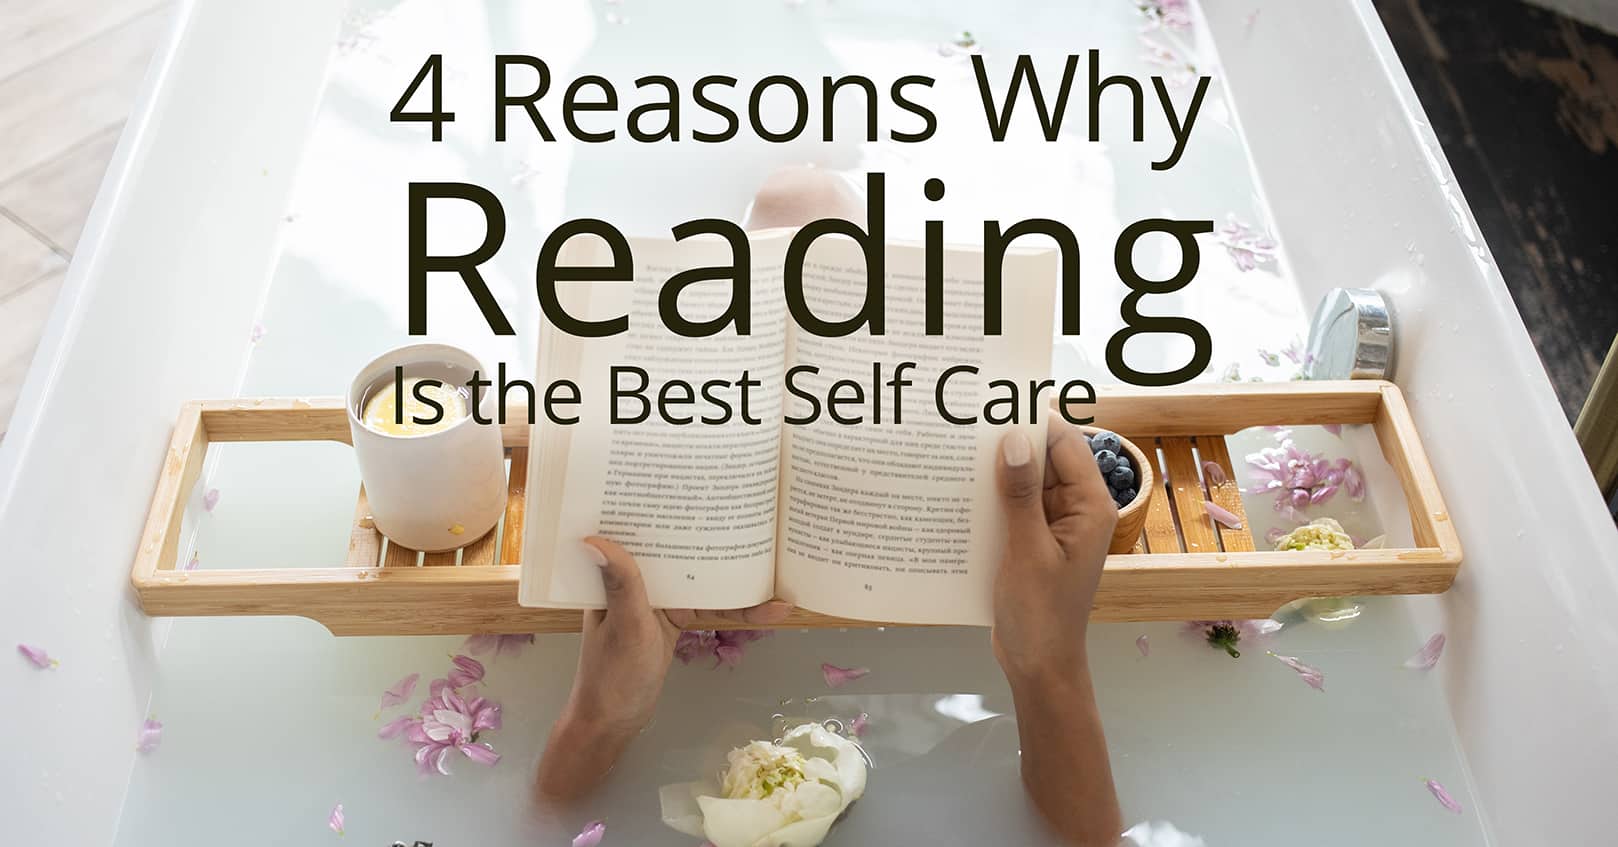 reading is the best self care